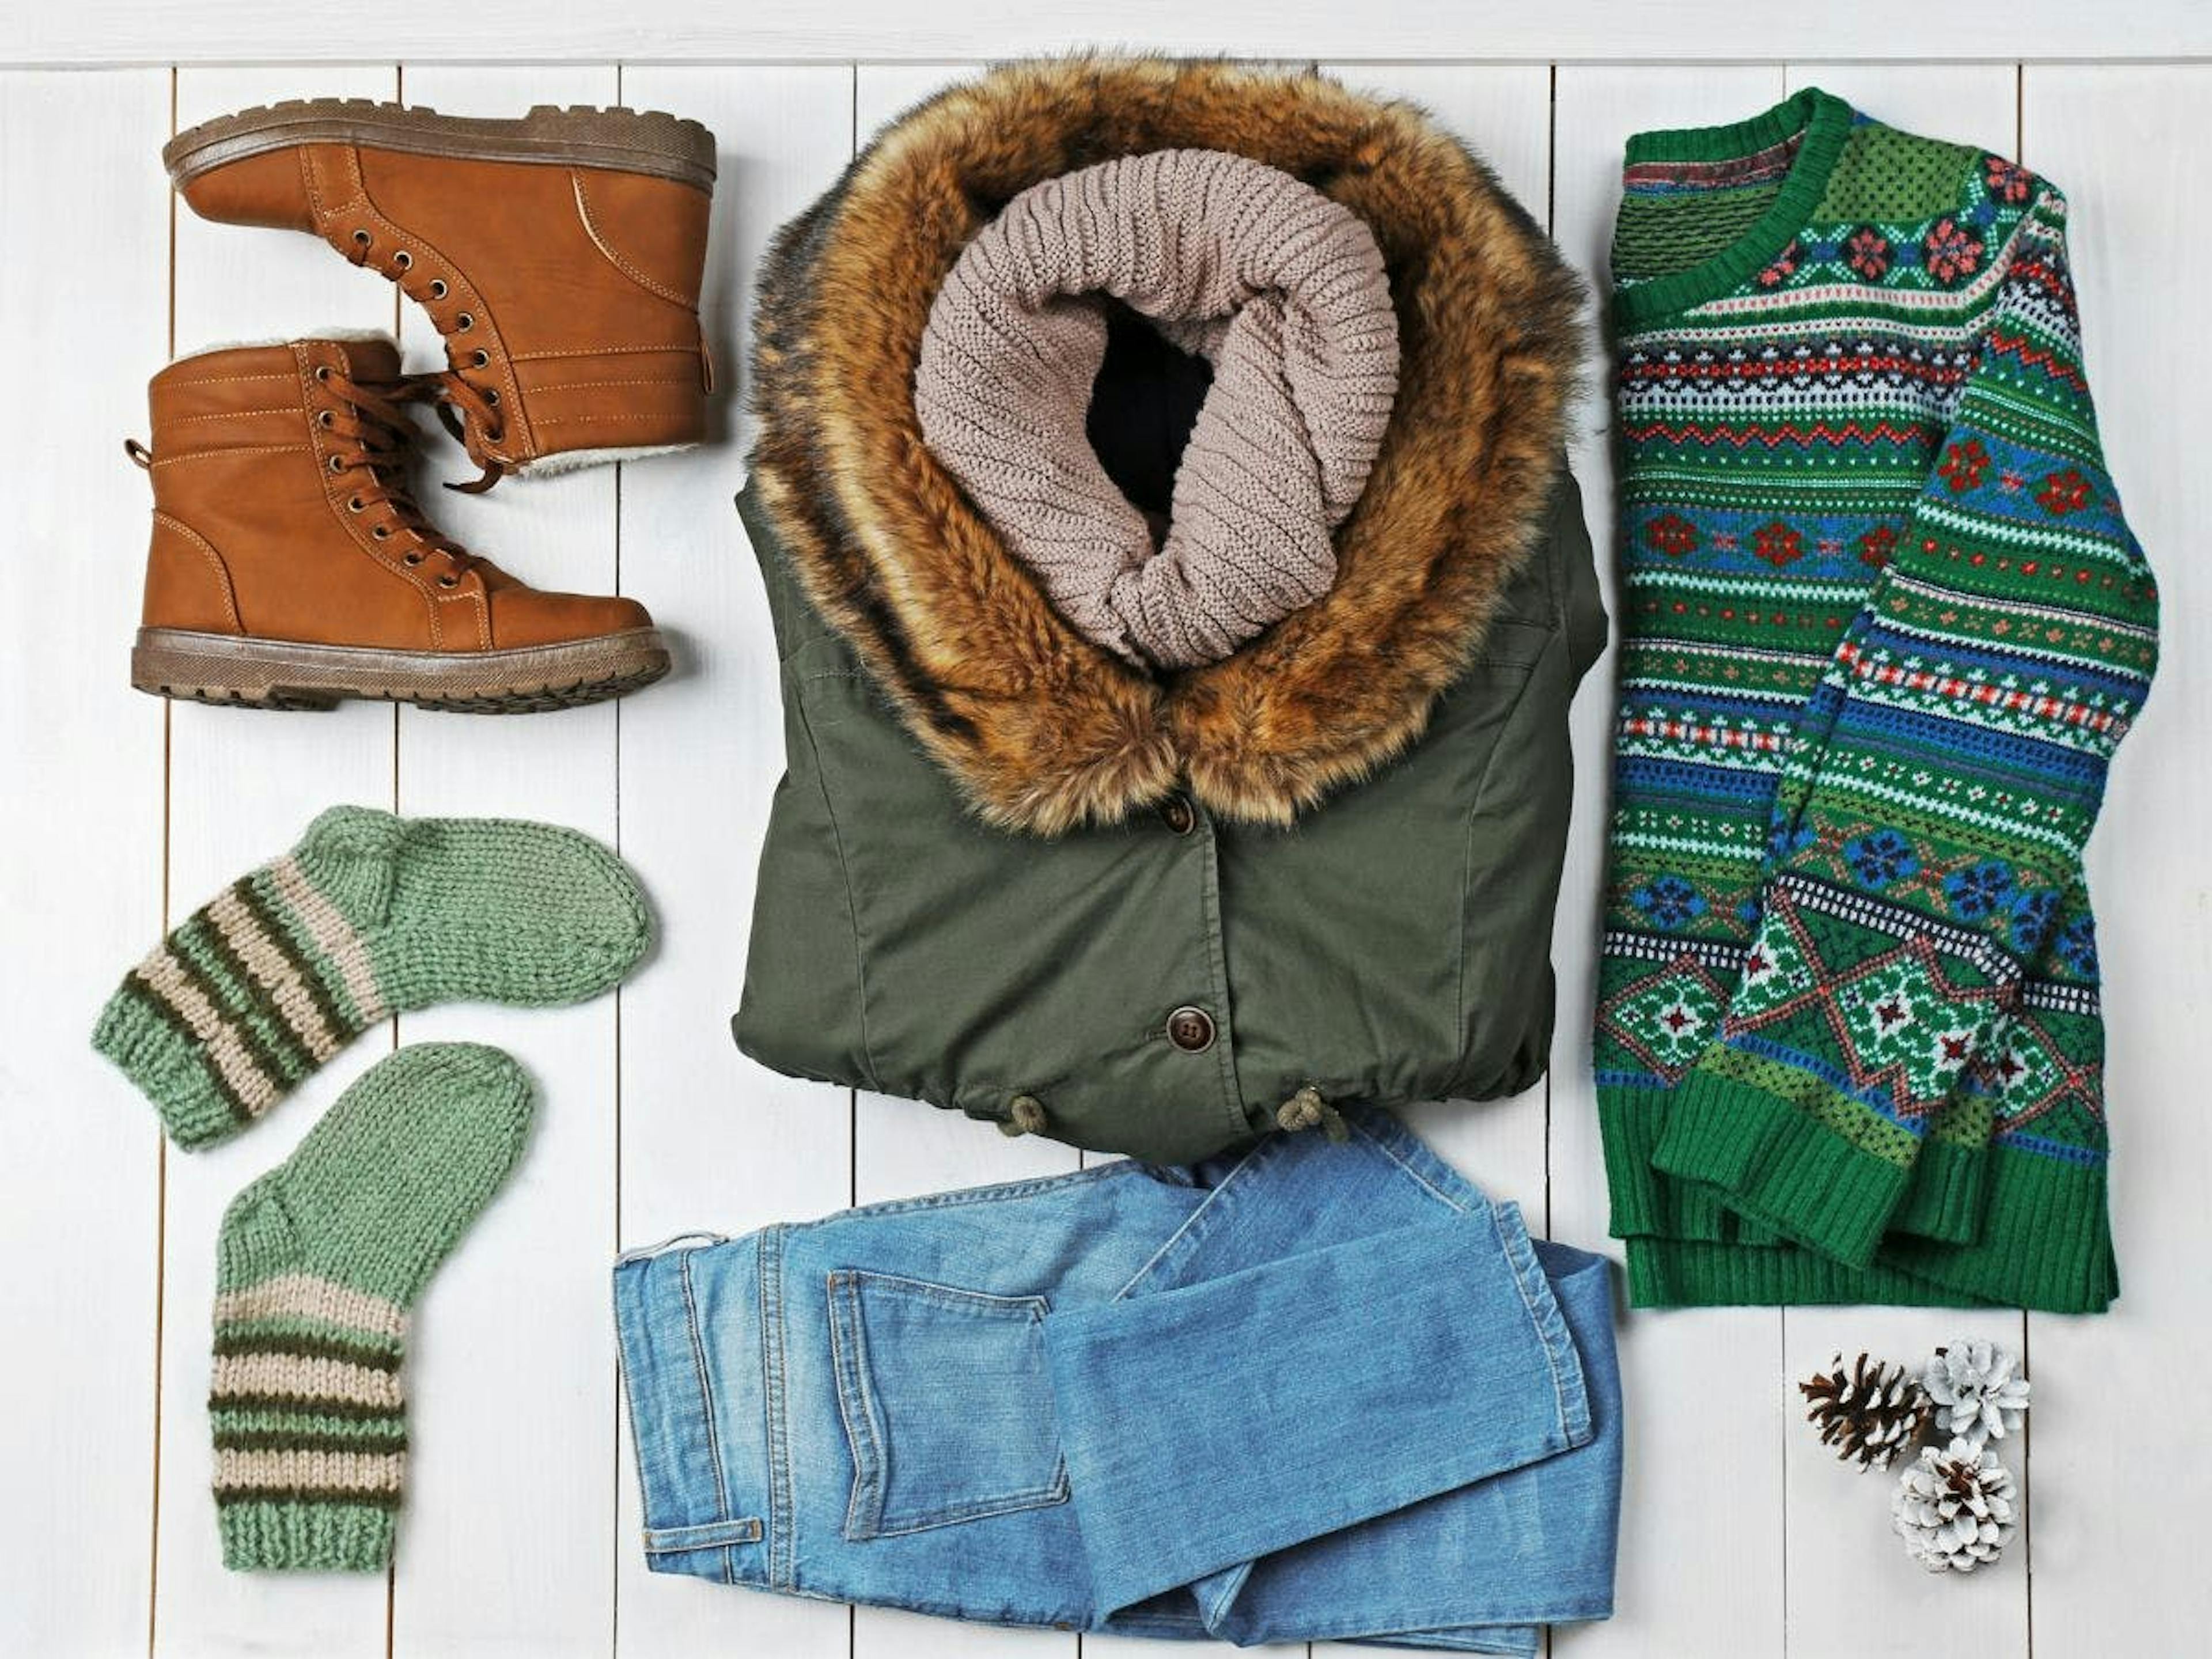 How to stay warm and fashionable this winter?